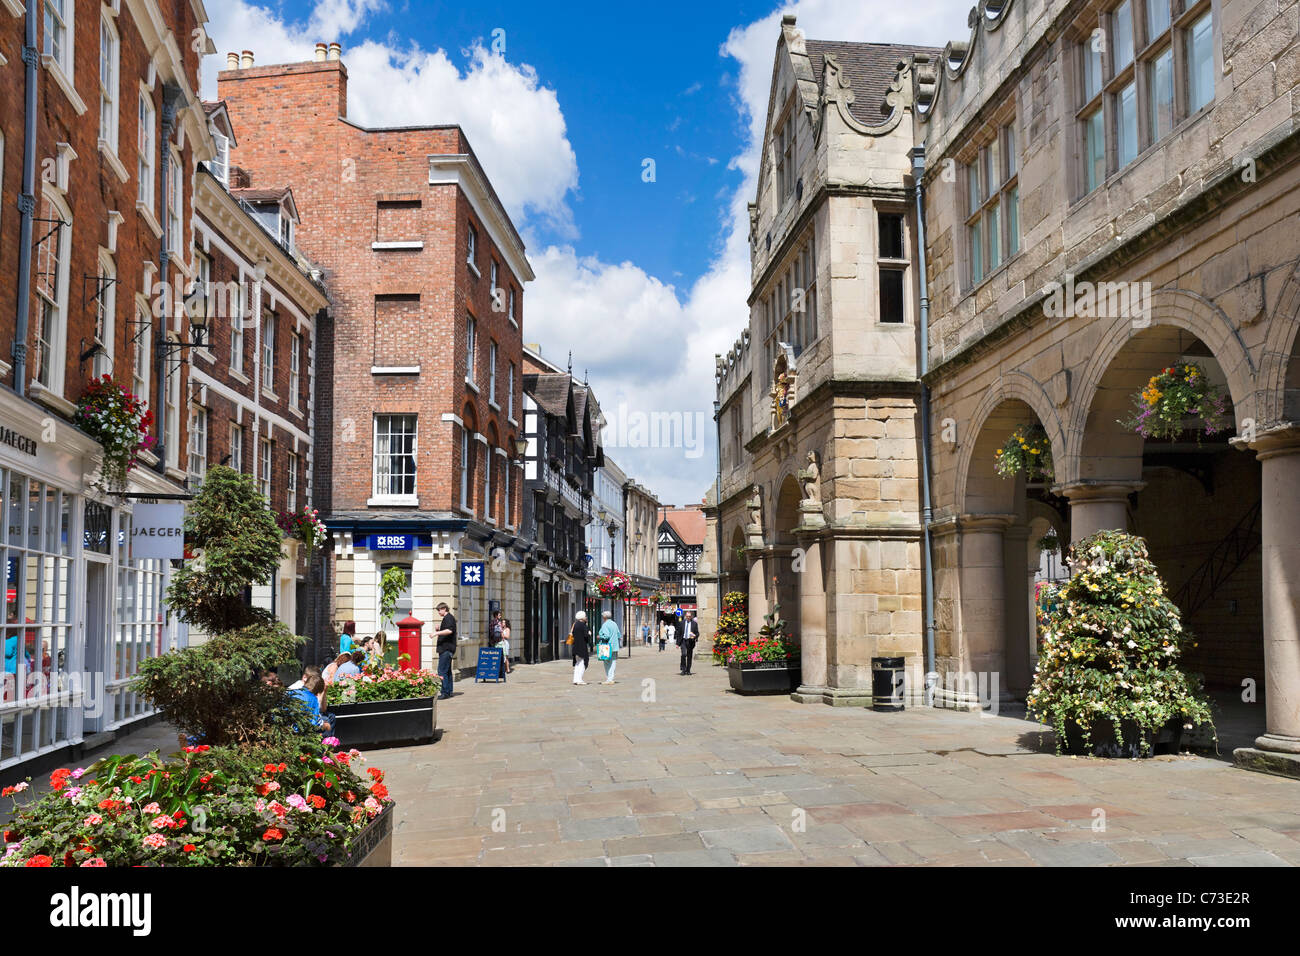 Shops and the Old Market Hall in The Square, Shrewsbury, Shropshire, England, UK Stock Photo